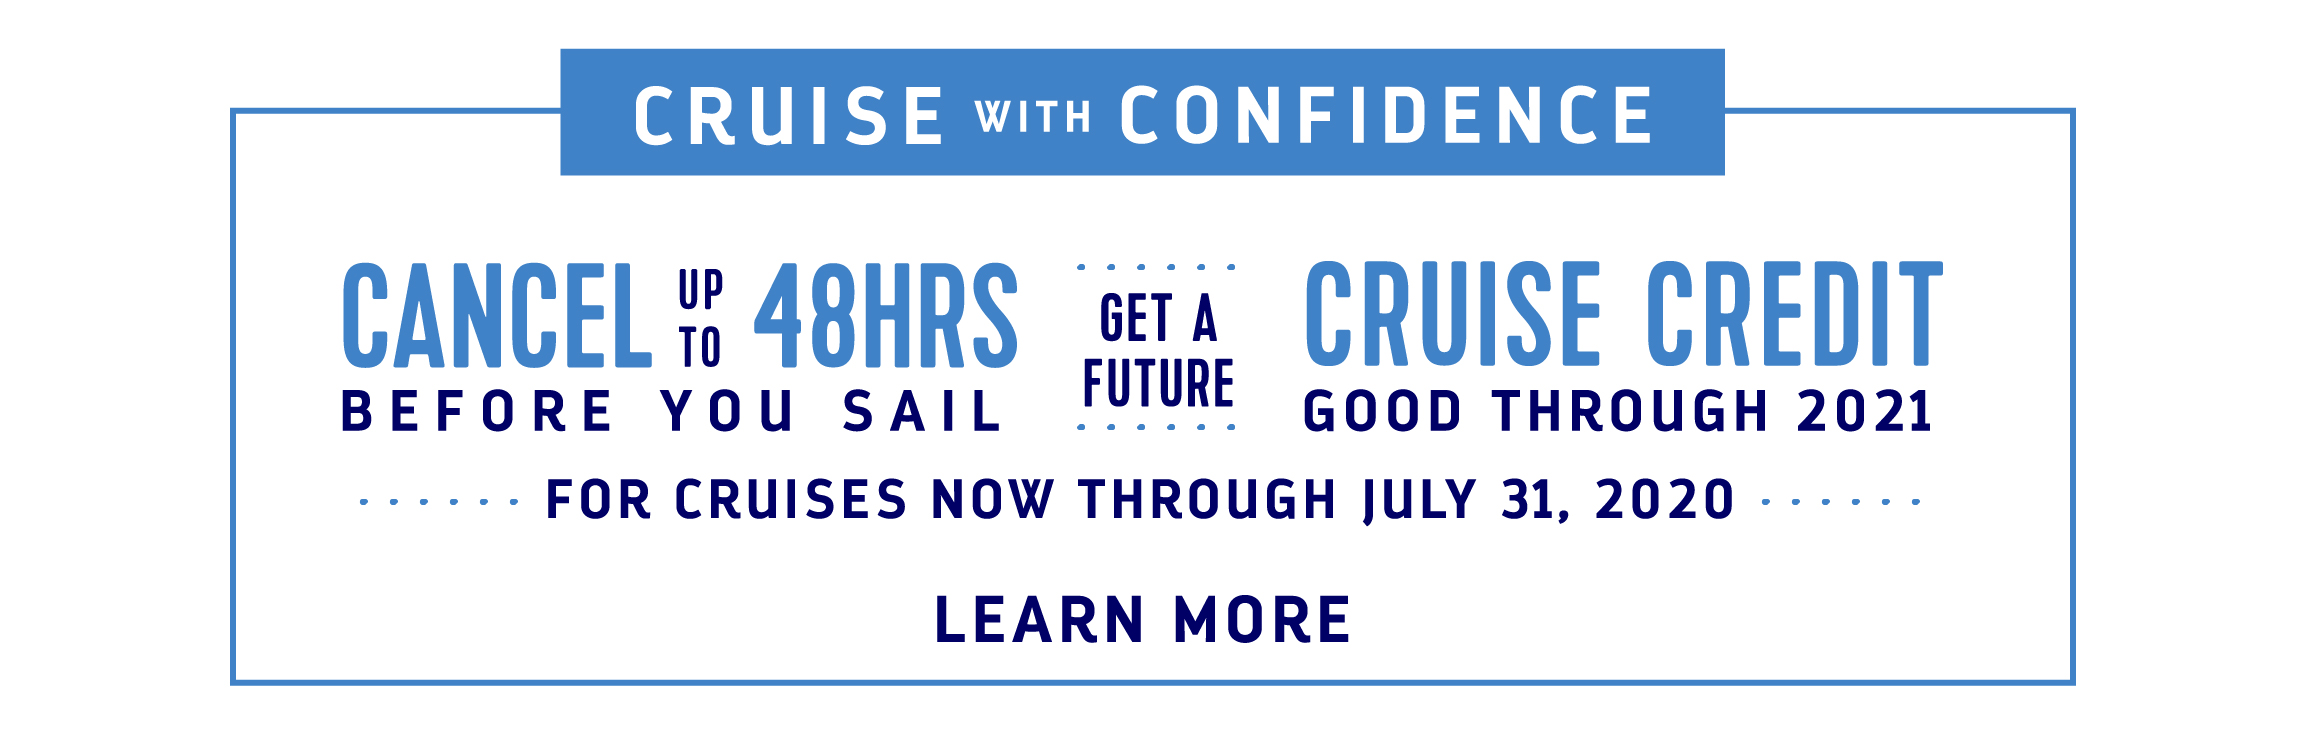 cruise-with-confidence-lockup-learn-more.jpg